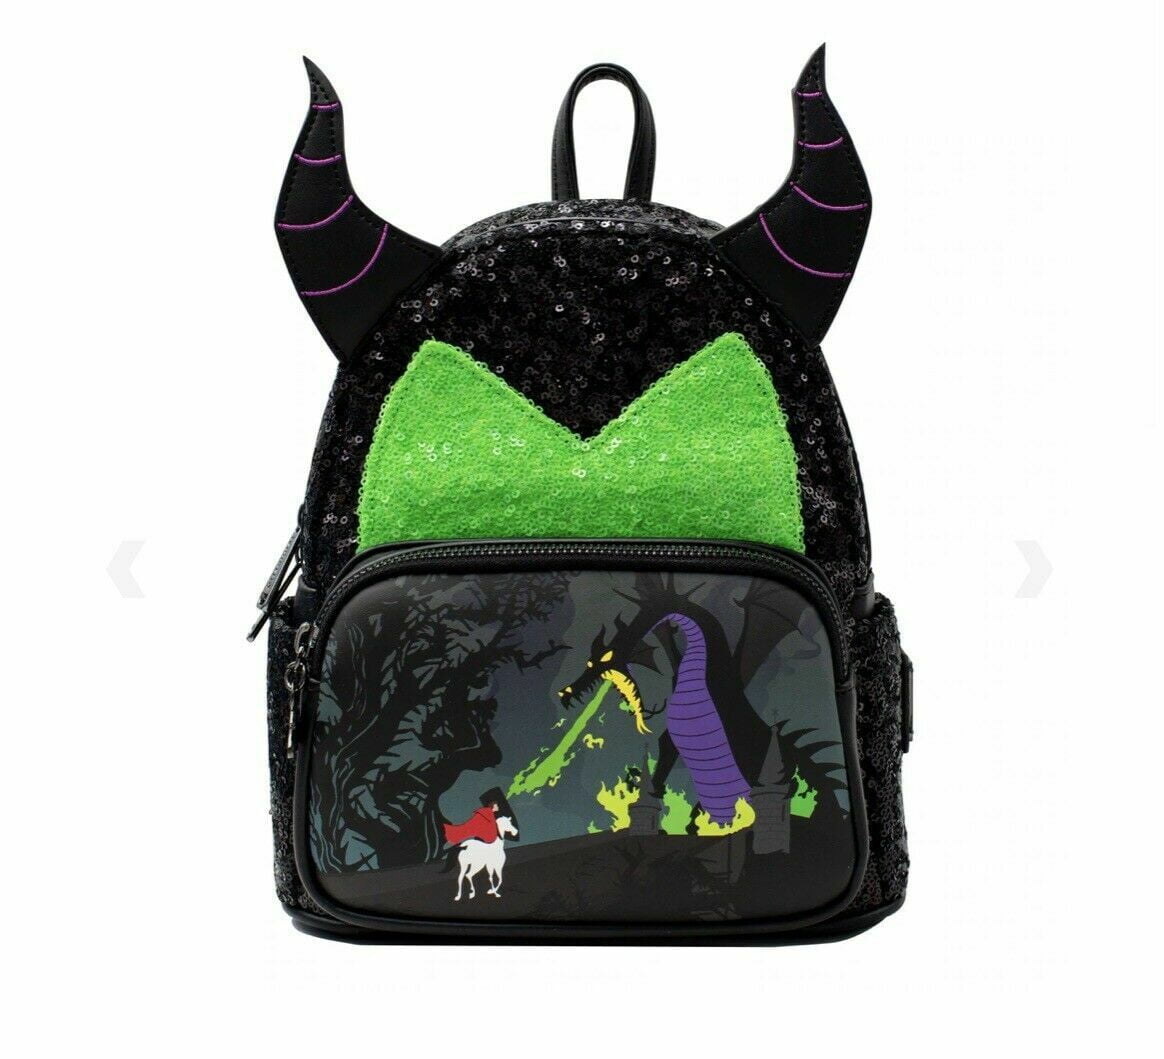 Loungefly Disney Maleficent Dragon Mini Backpack Black Brand New with Tags